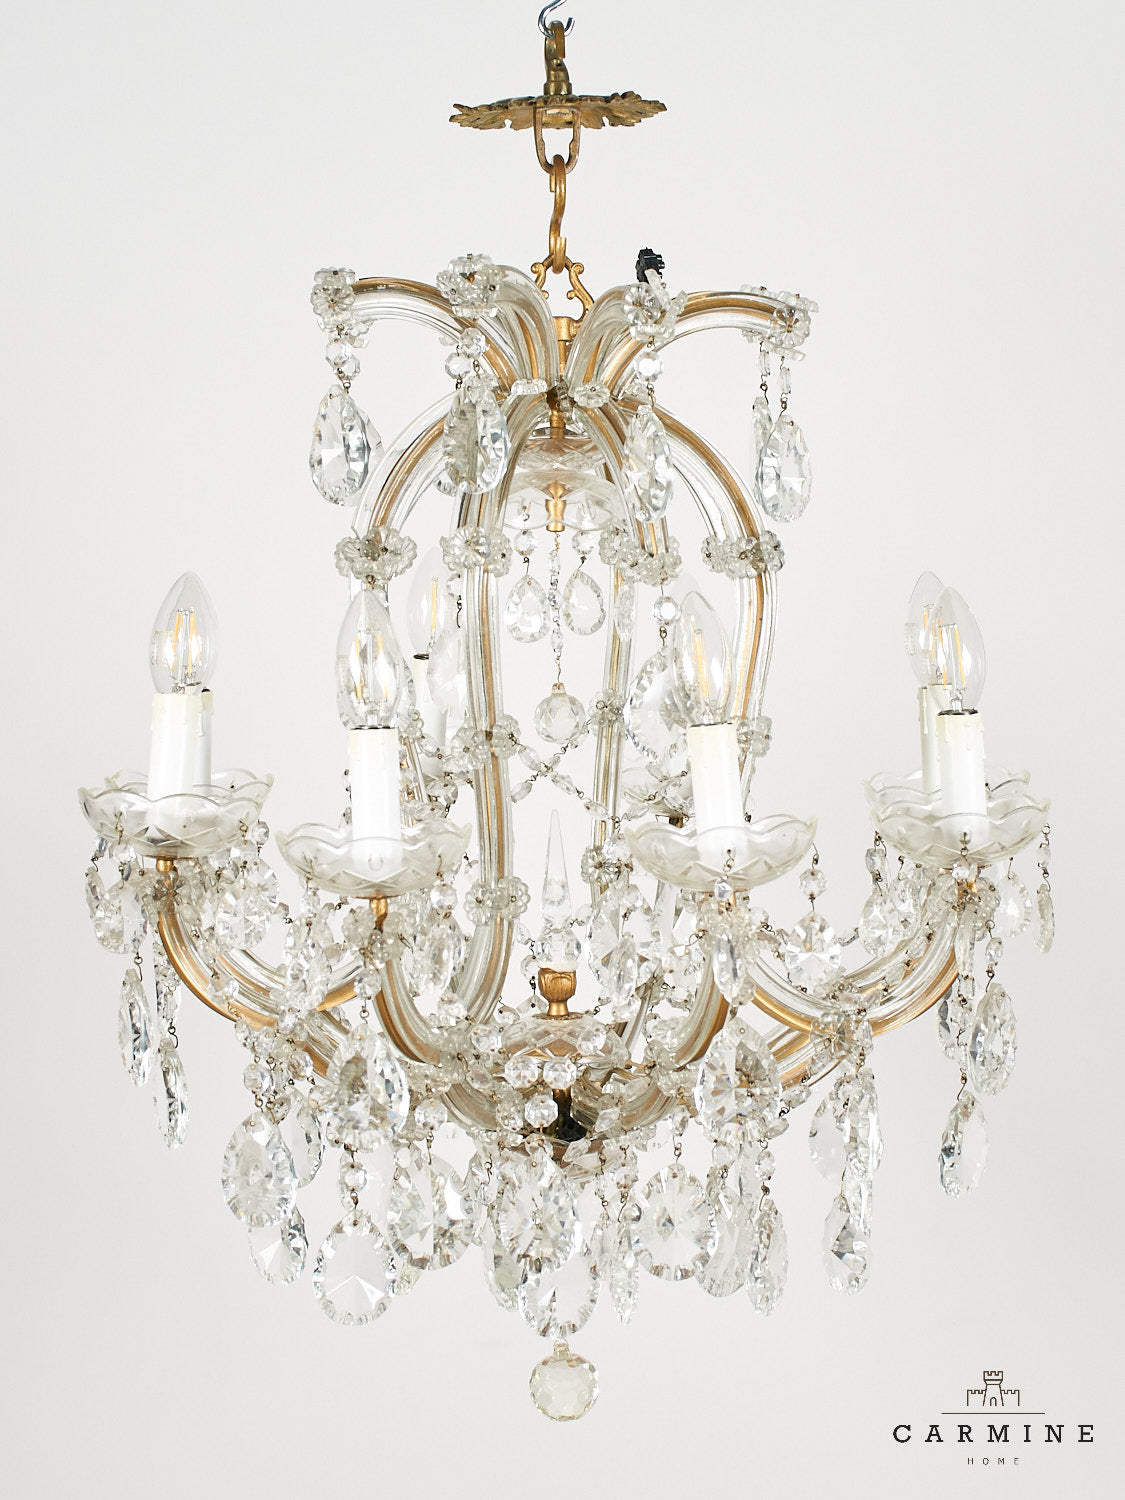 8-flame chandelier "Maria Theresia"